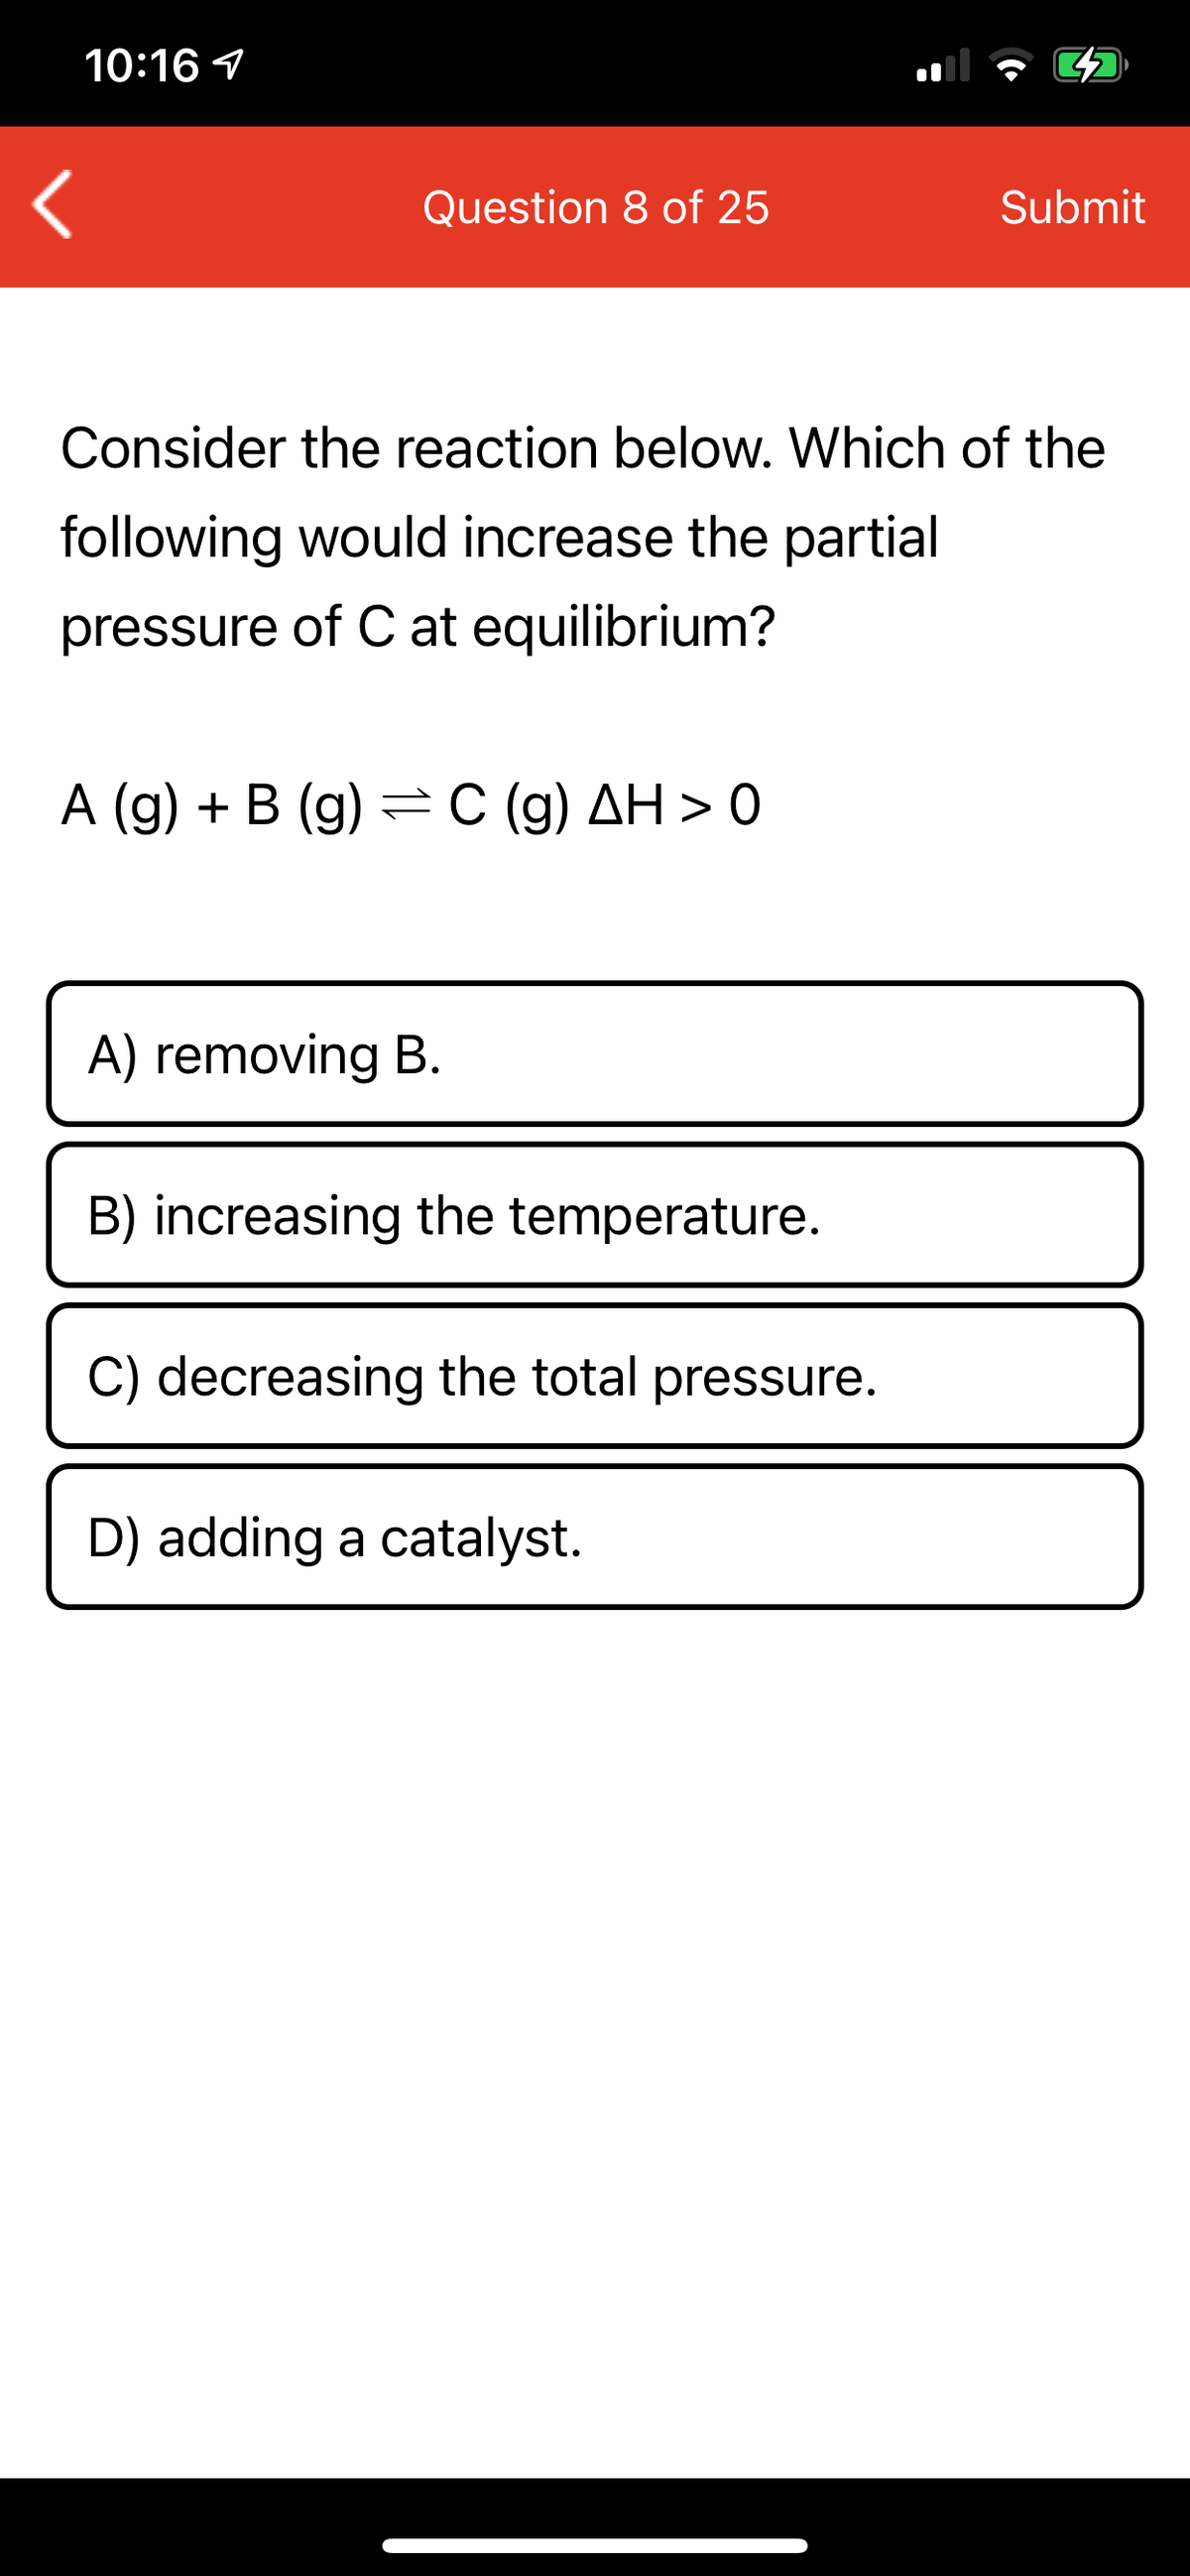 10:16 1
Question 8 of 25
Submit
Consider the reaction below. Which of the
following would increase the partial
pressure of C at equilibrium?
A (g) + B (g) =C (g) AH > 0
A) removing B.
B) increasing the temperature.
C) decreasing the total pressure.
D) adding a catalyst.
